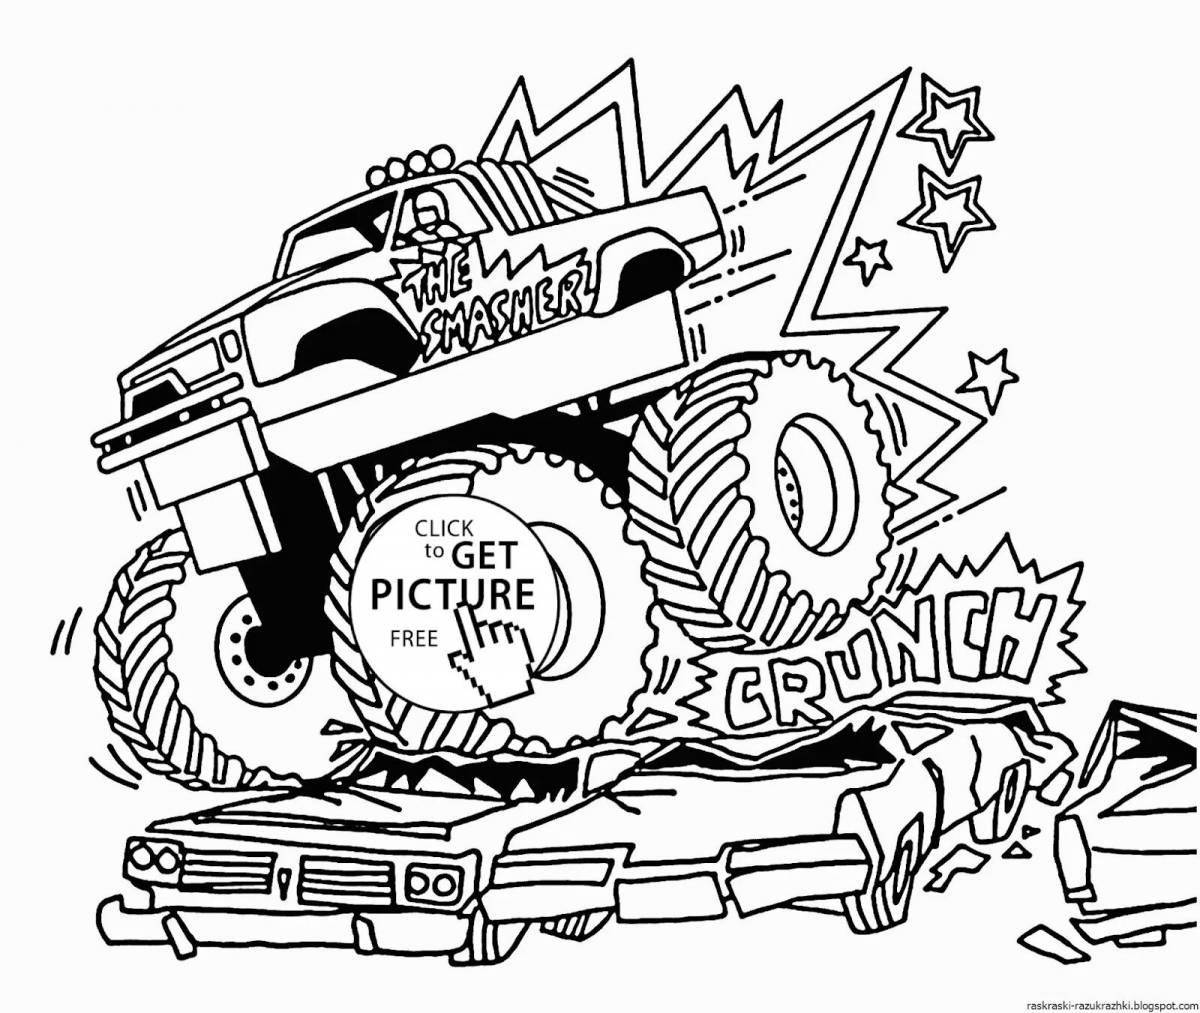 Coloring page for bright racing truck